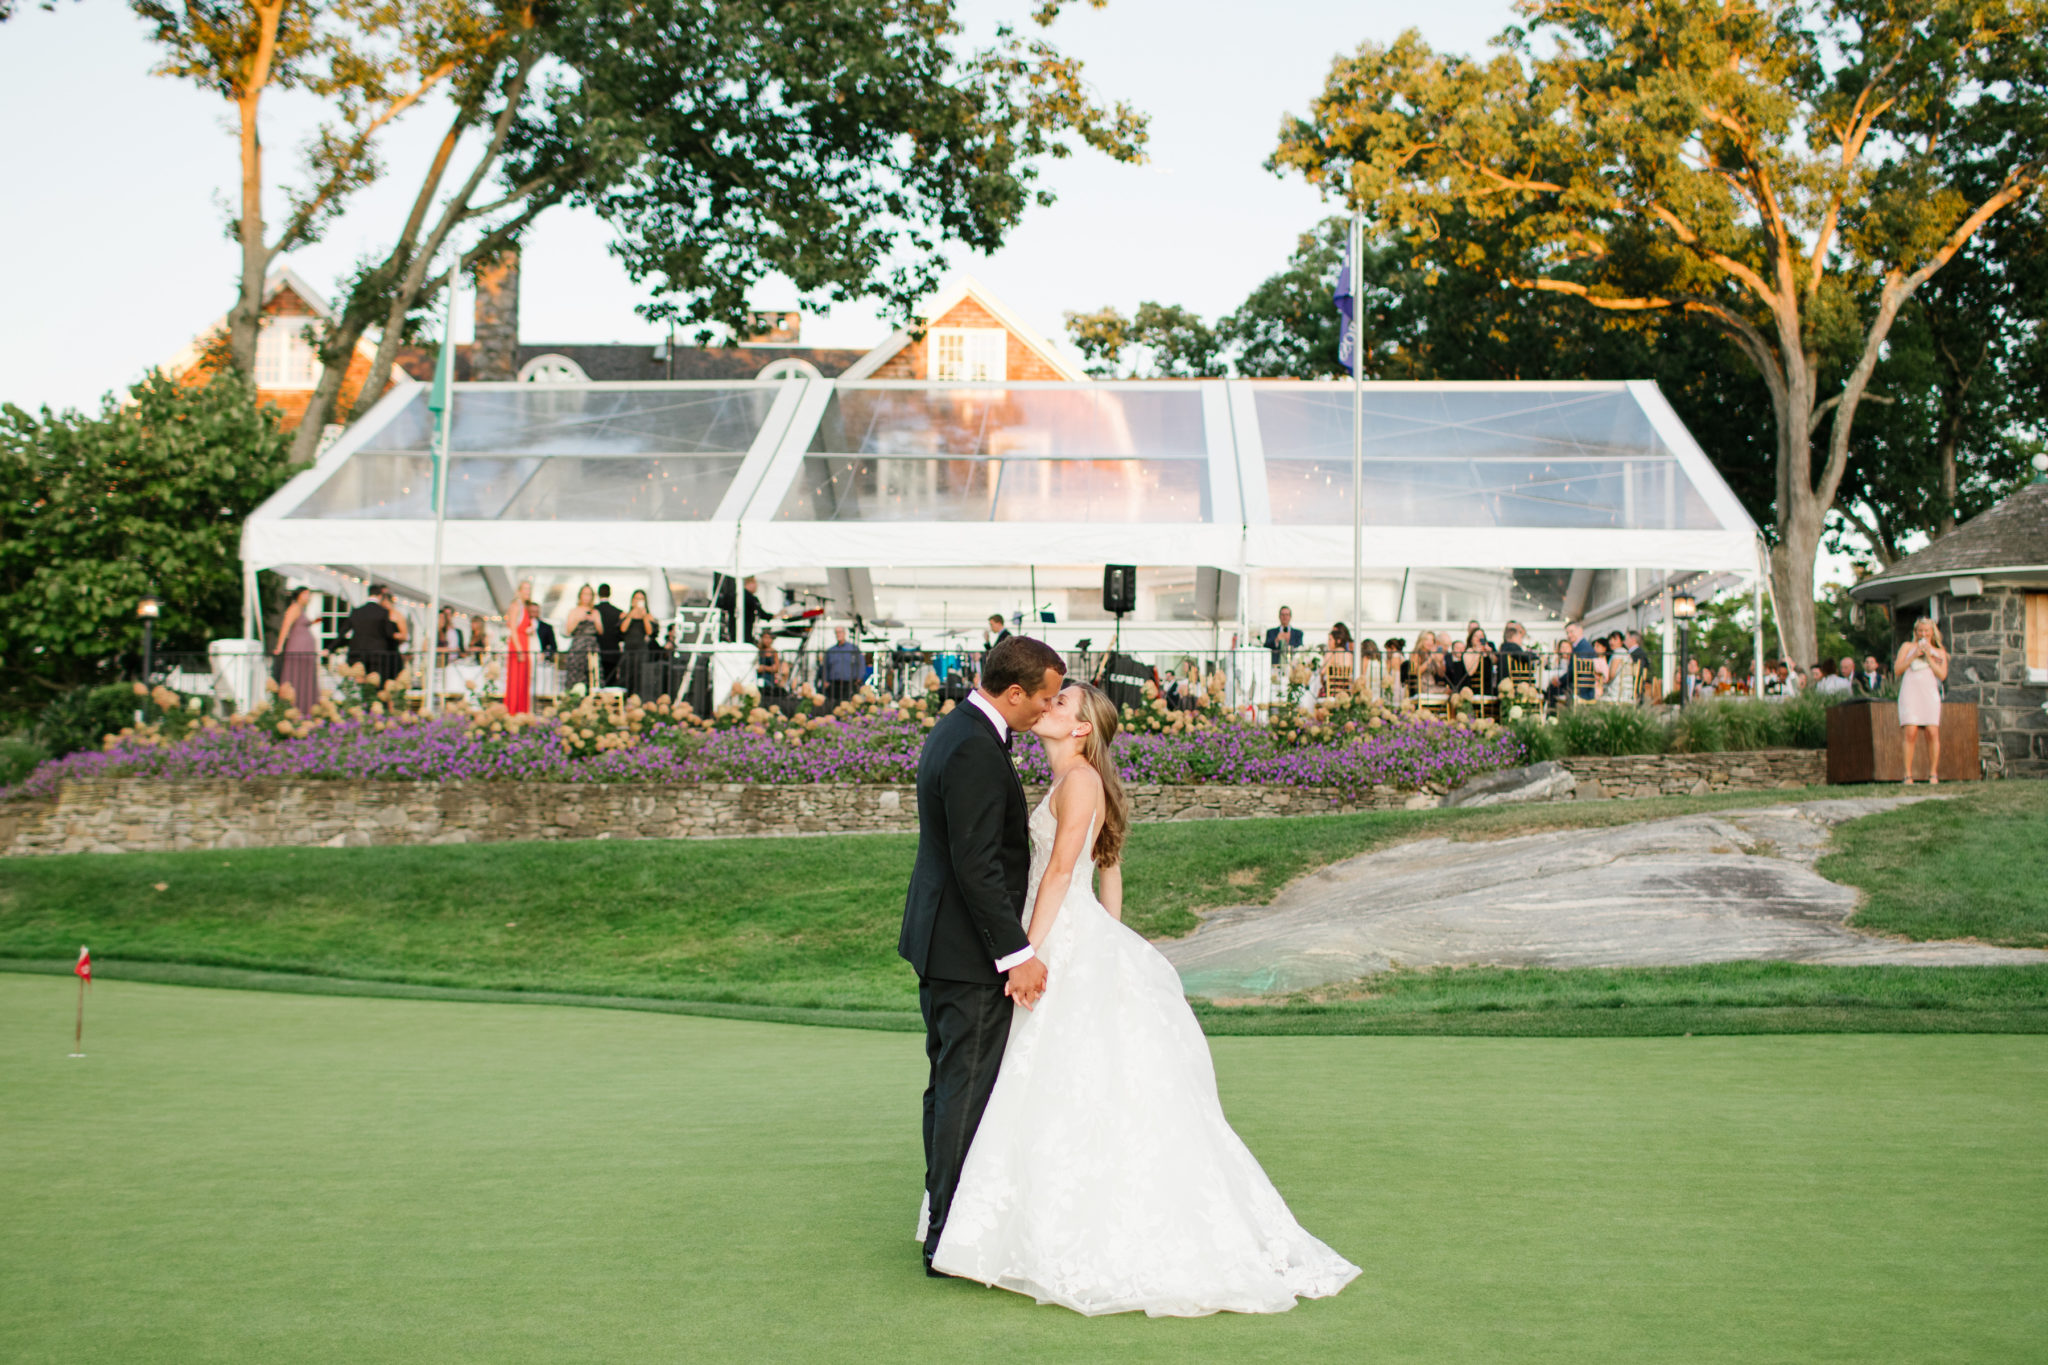 tented wedding reception photographed by Ashley Mac Photographs